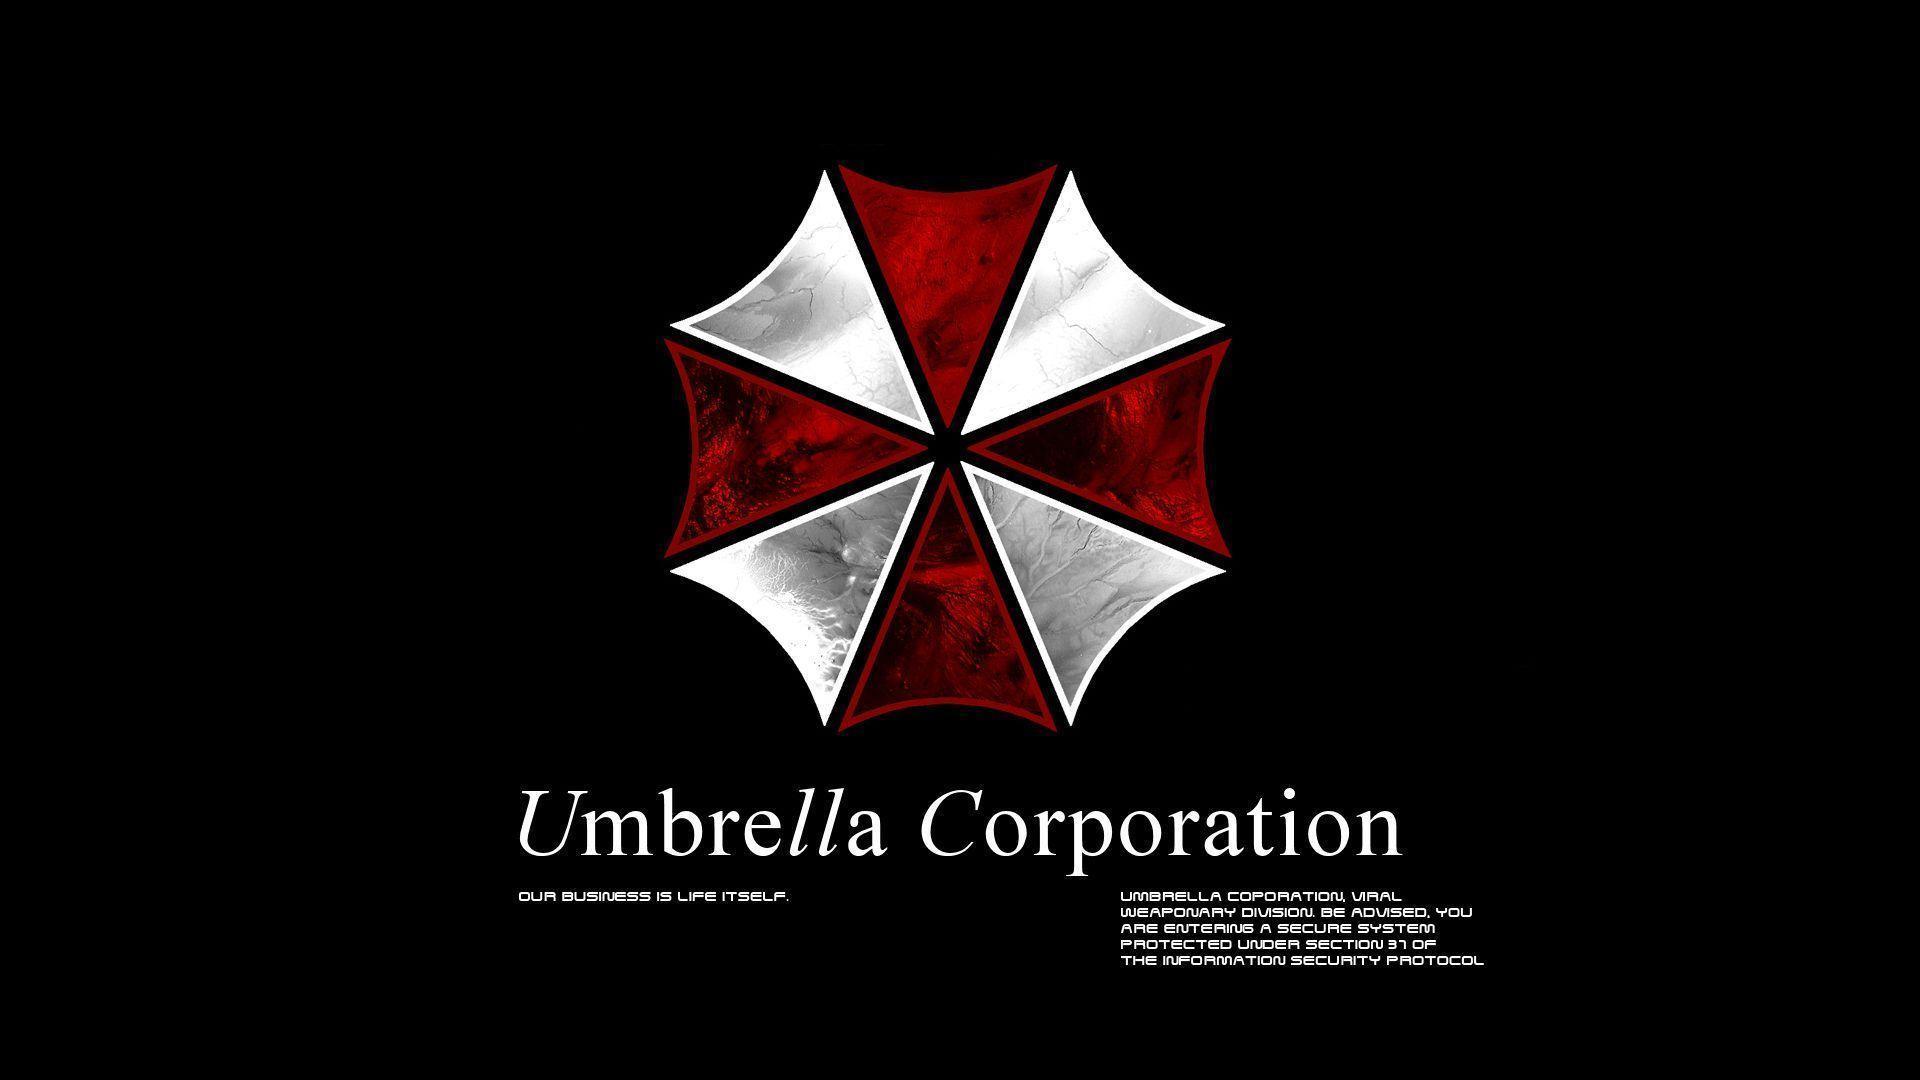 Wallpapers resident evil, umbrella, game wallpapers games